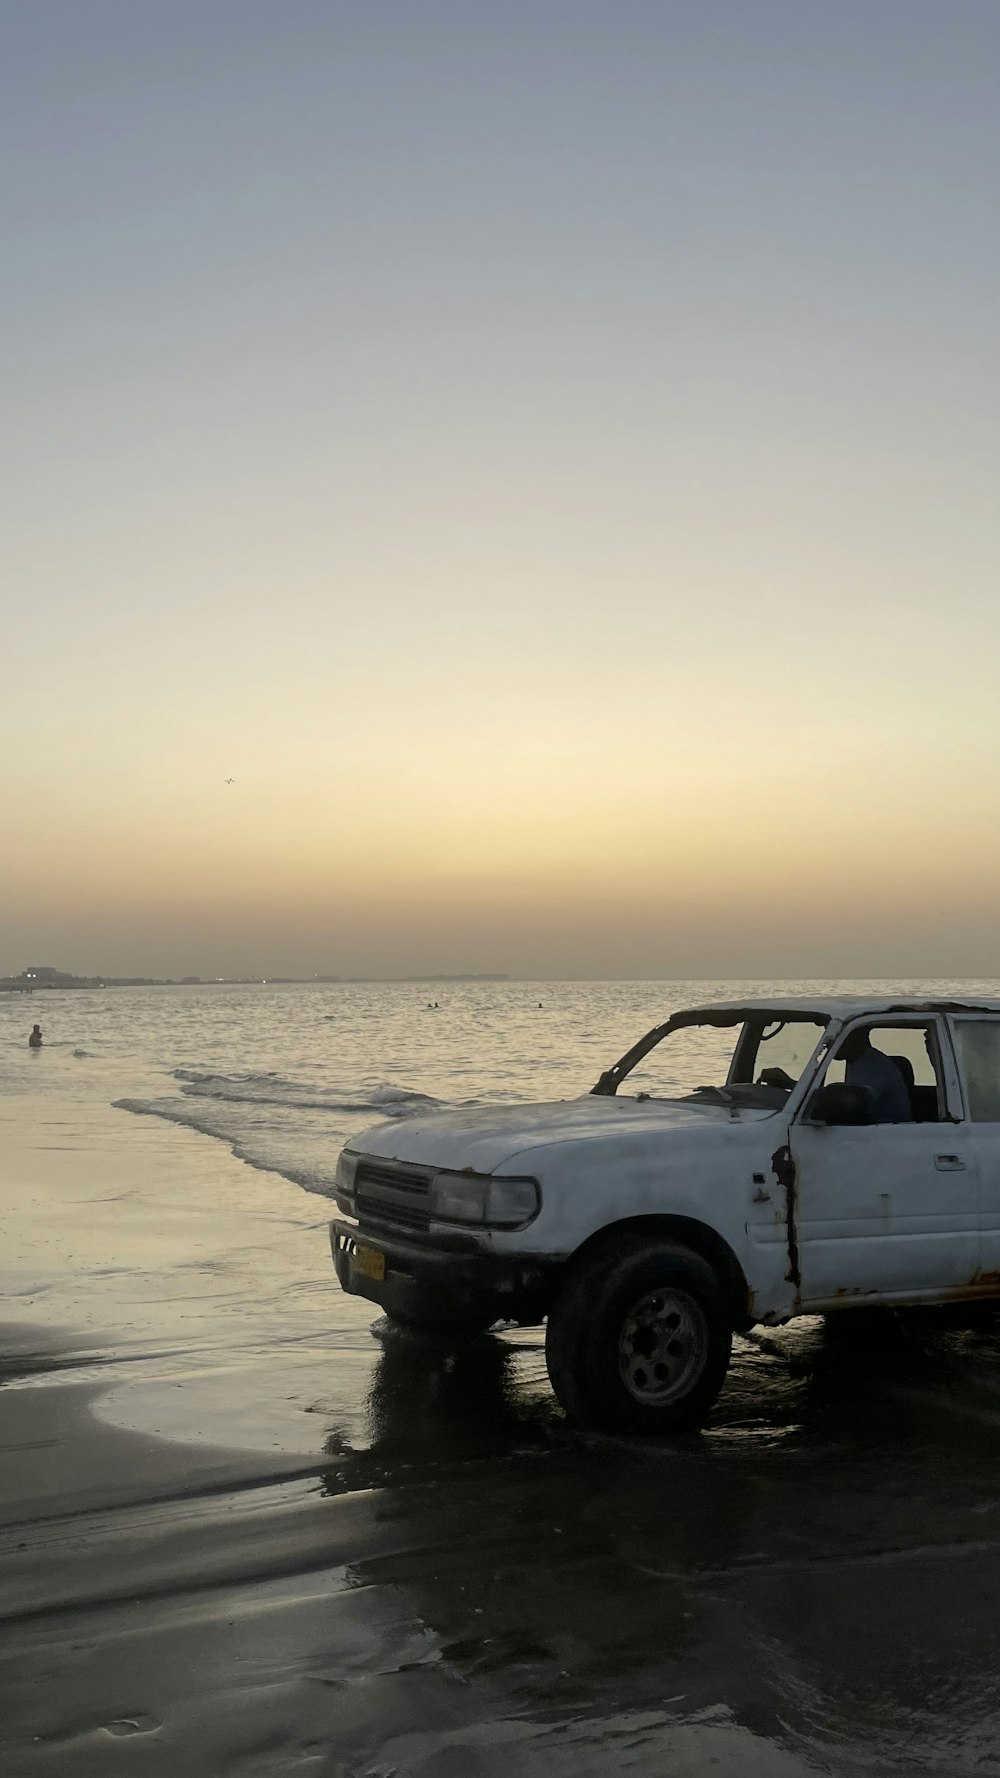 a truck is parked on the beach near the water